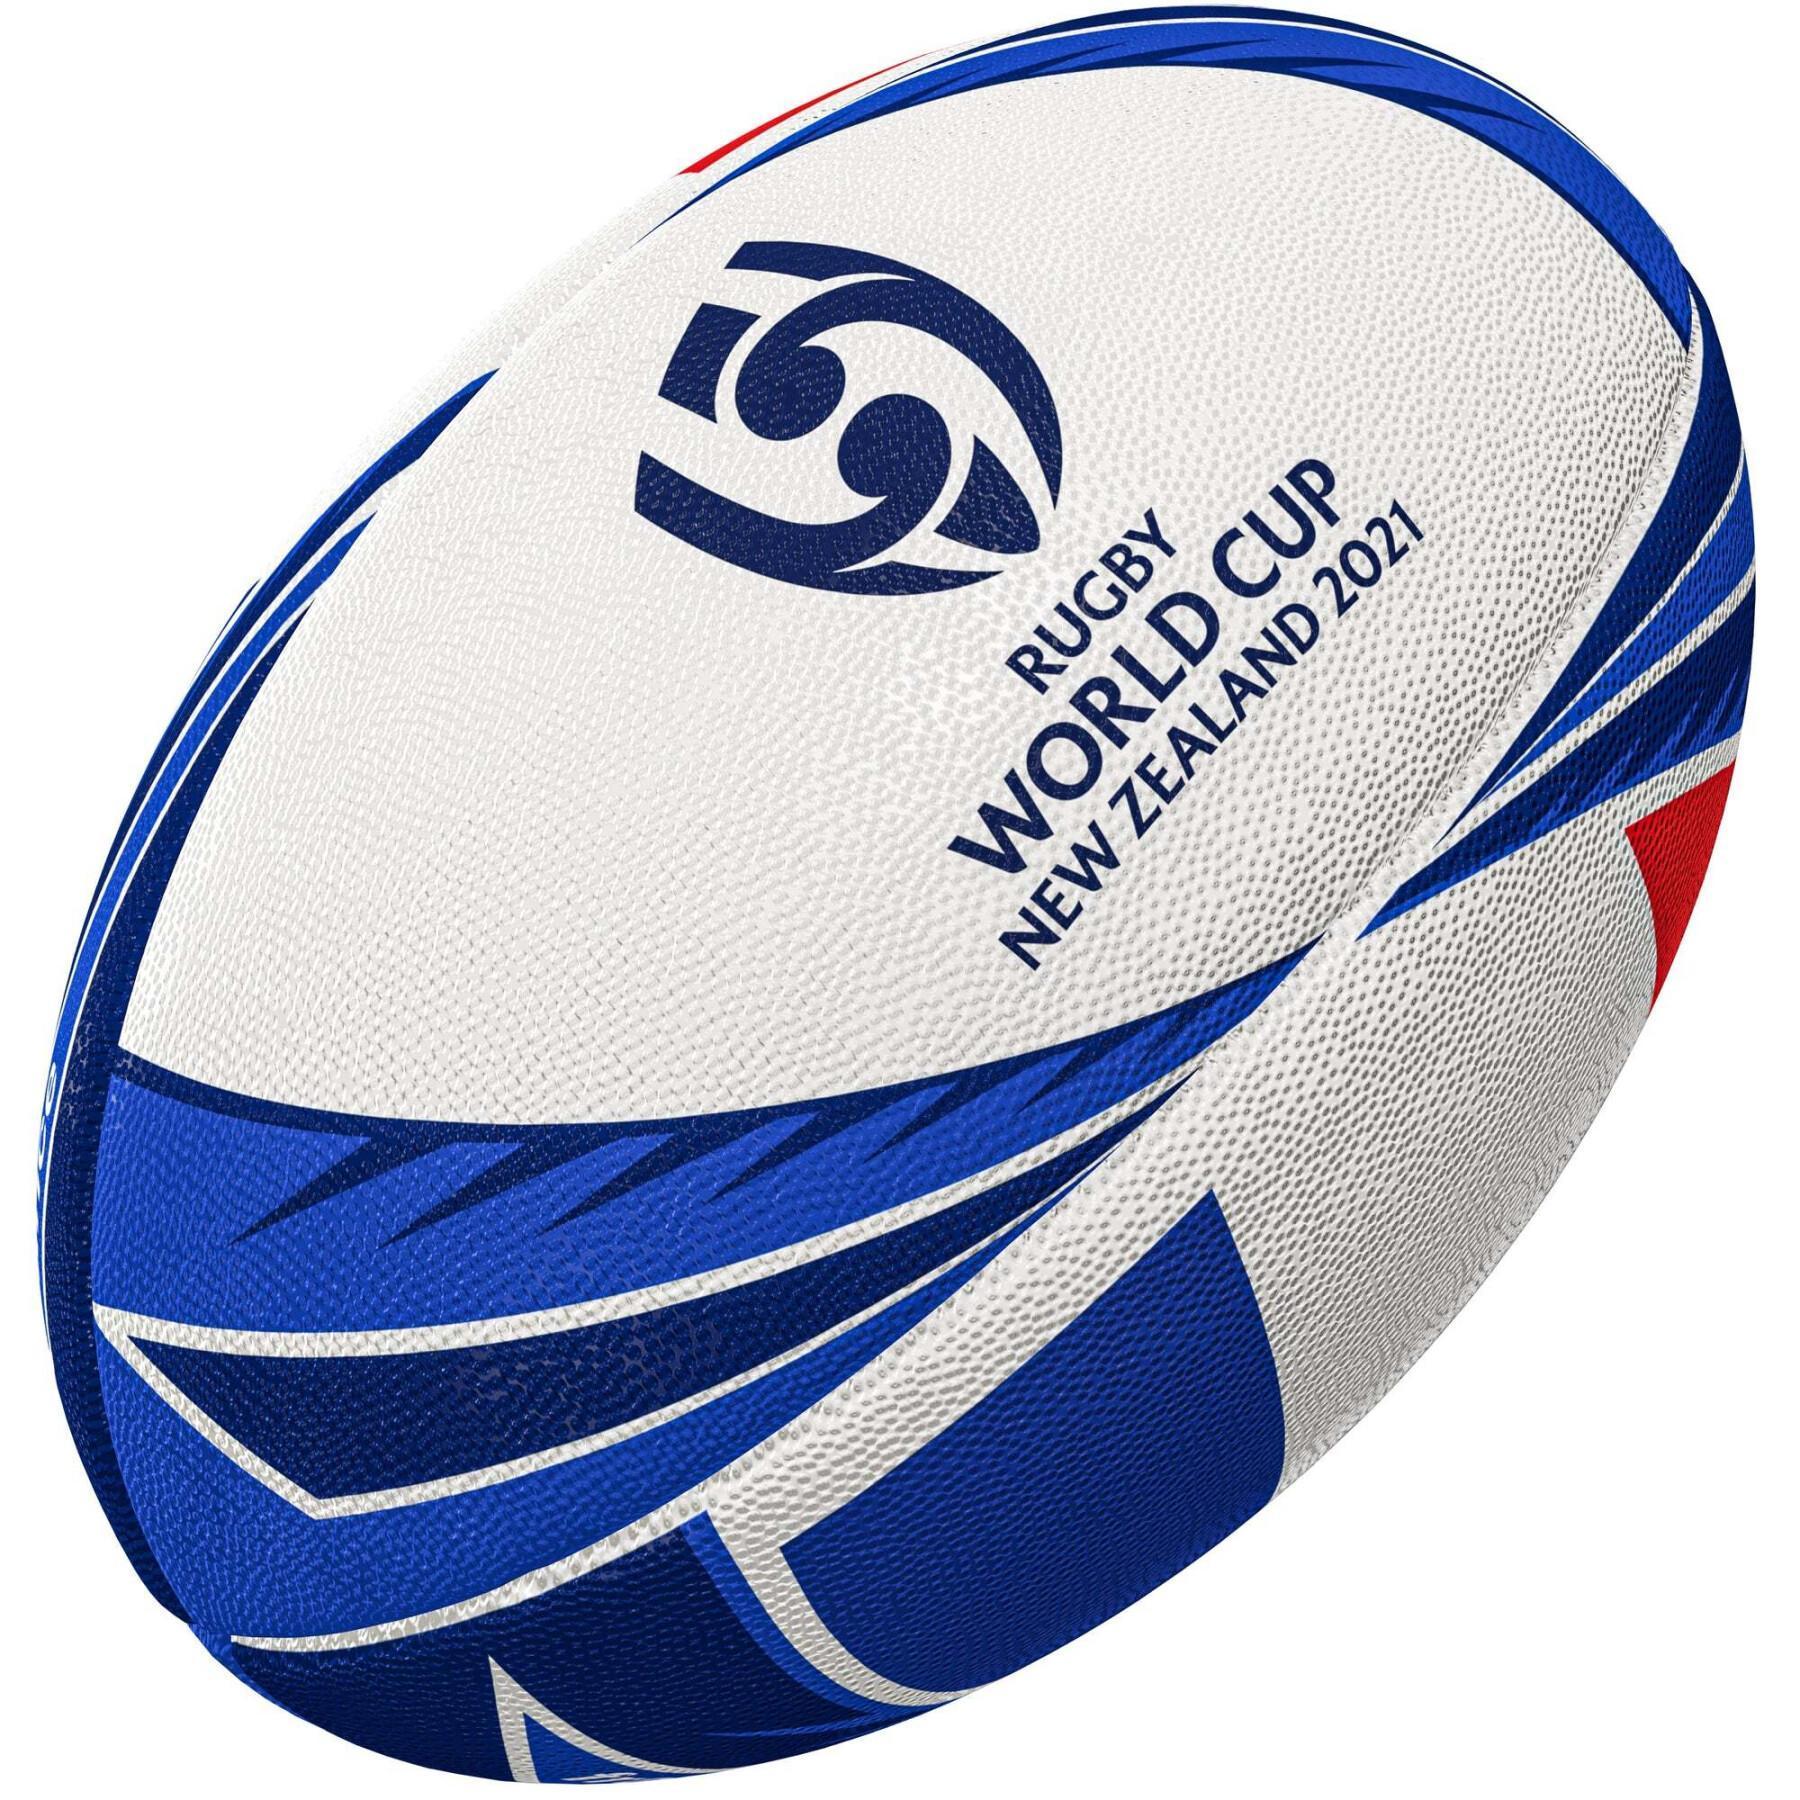 Rugbyball France Rugby Wolrd Cup 2021